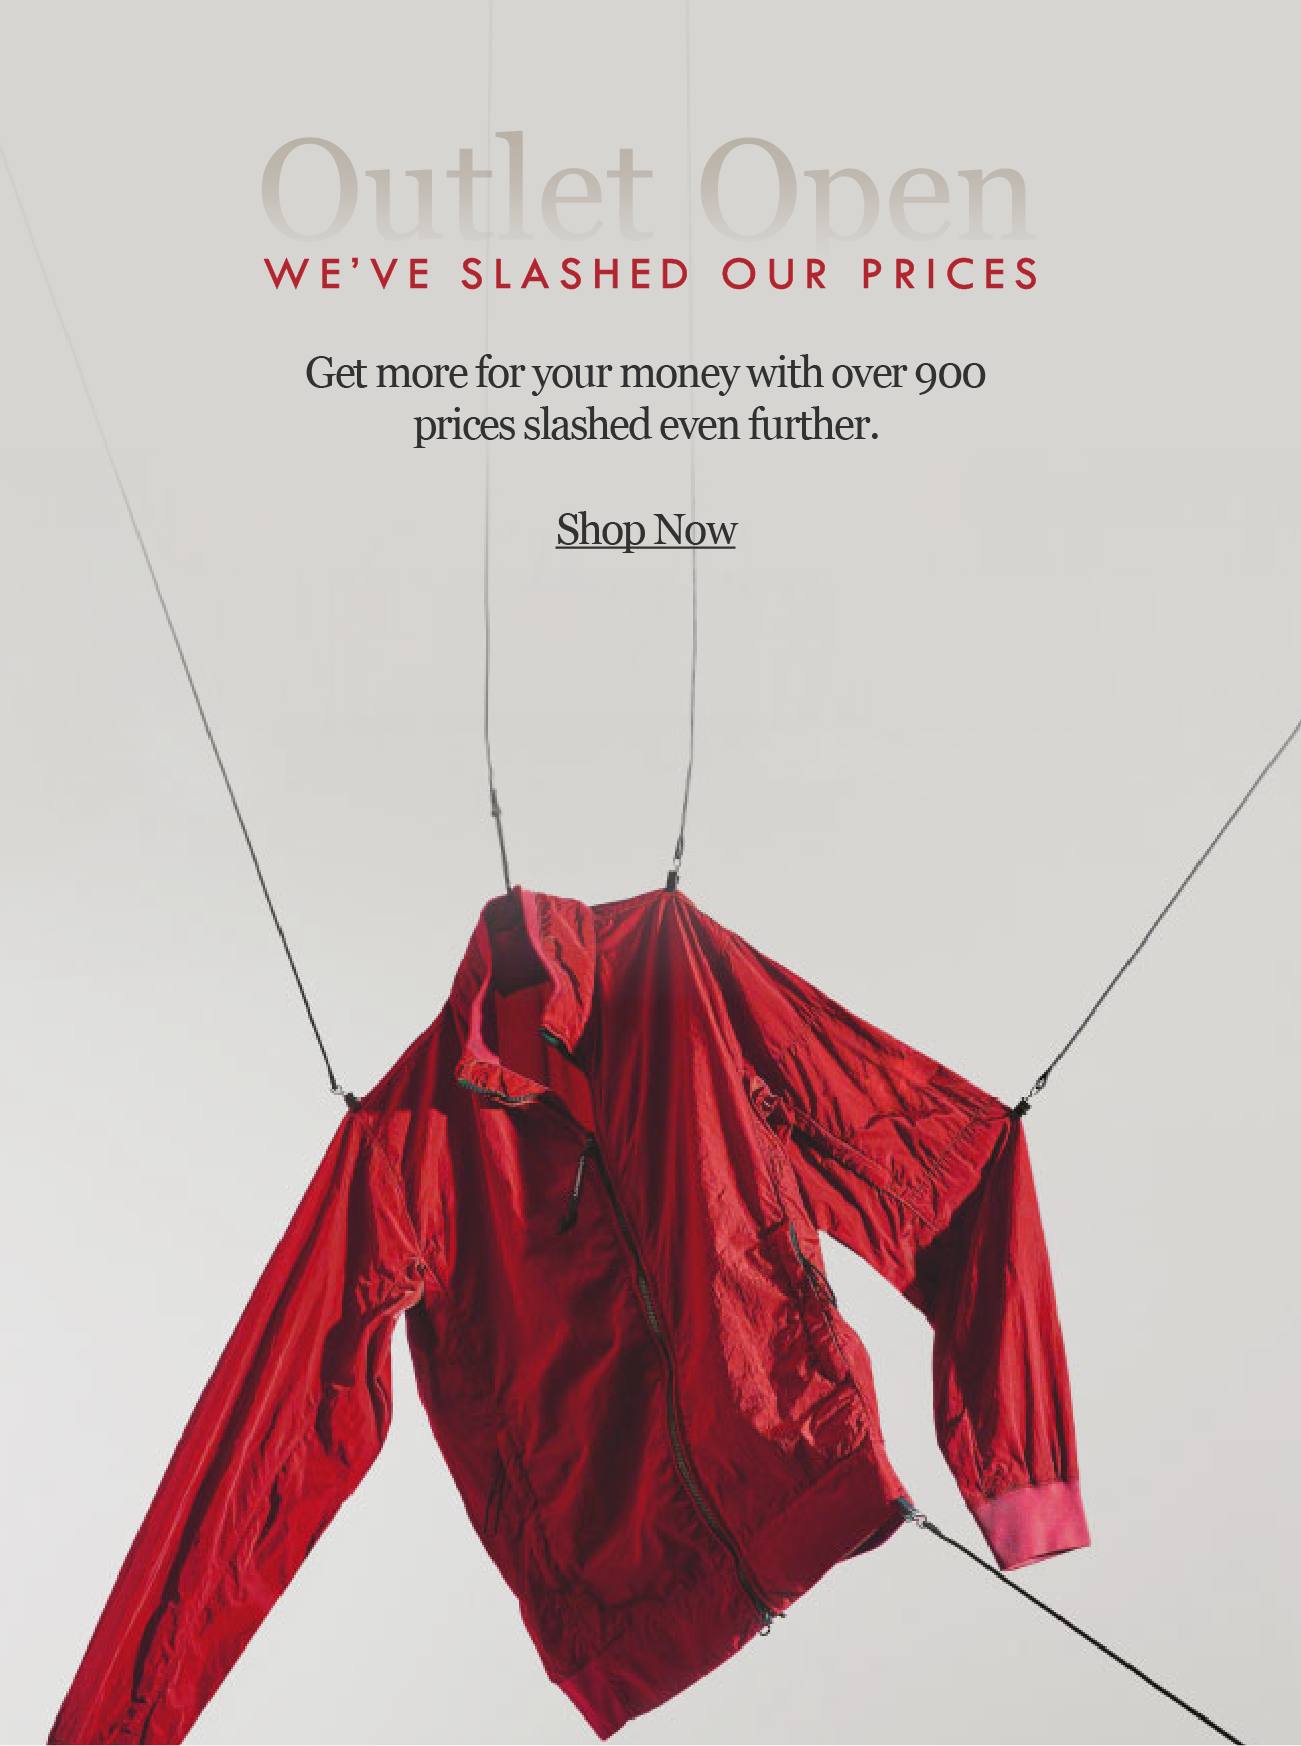 Outlet Open
we''ve slashed our prices
gET MORE FOR YOUR MONEY WITH OVER 900 PRICES SLASHED EVEN FURTHER. 

Shop Now